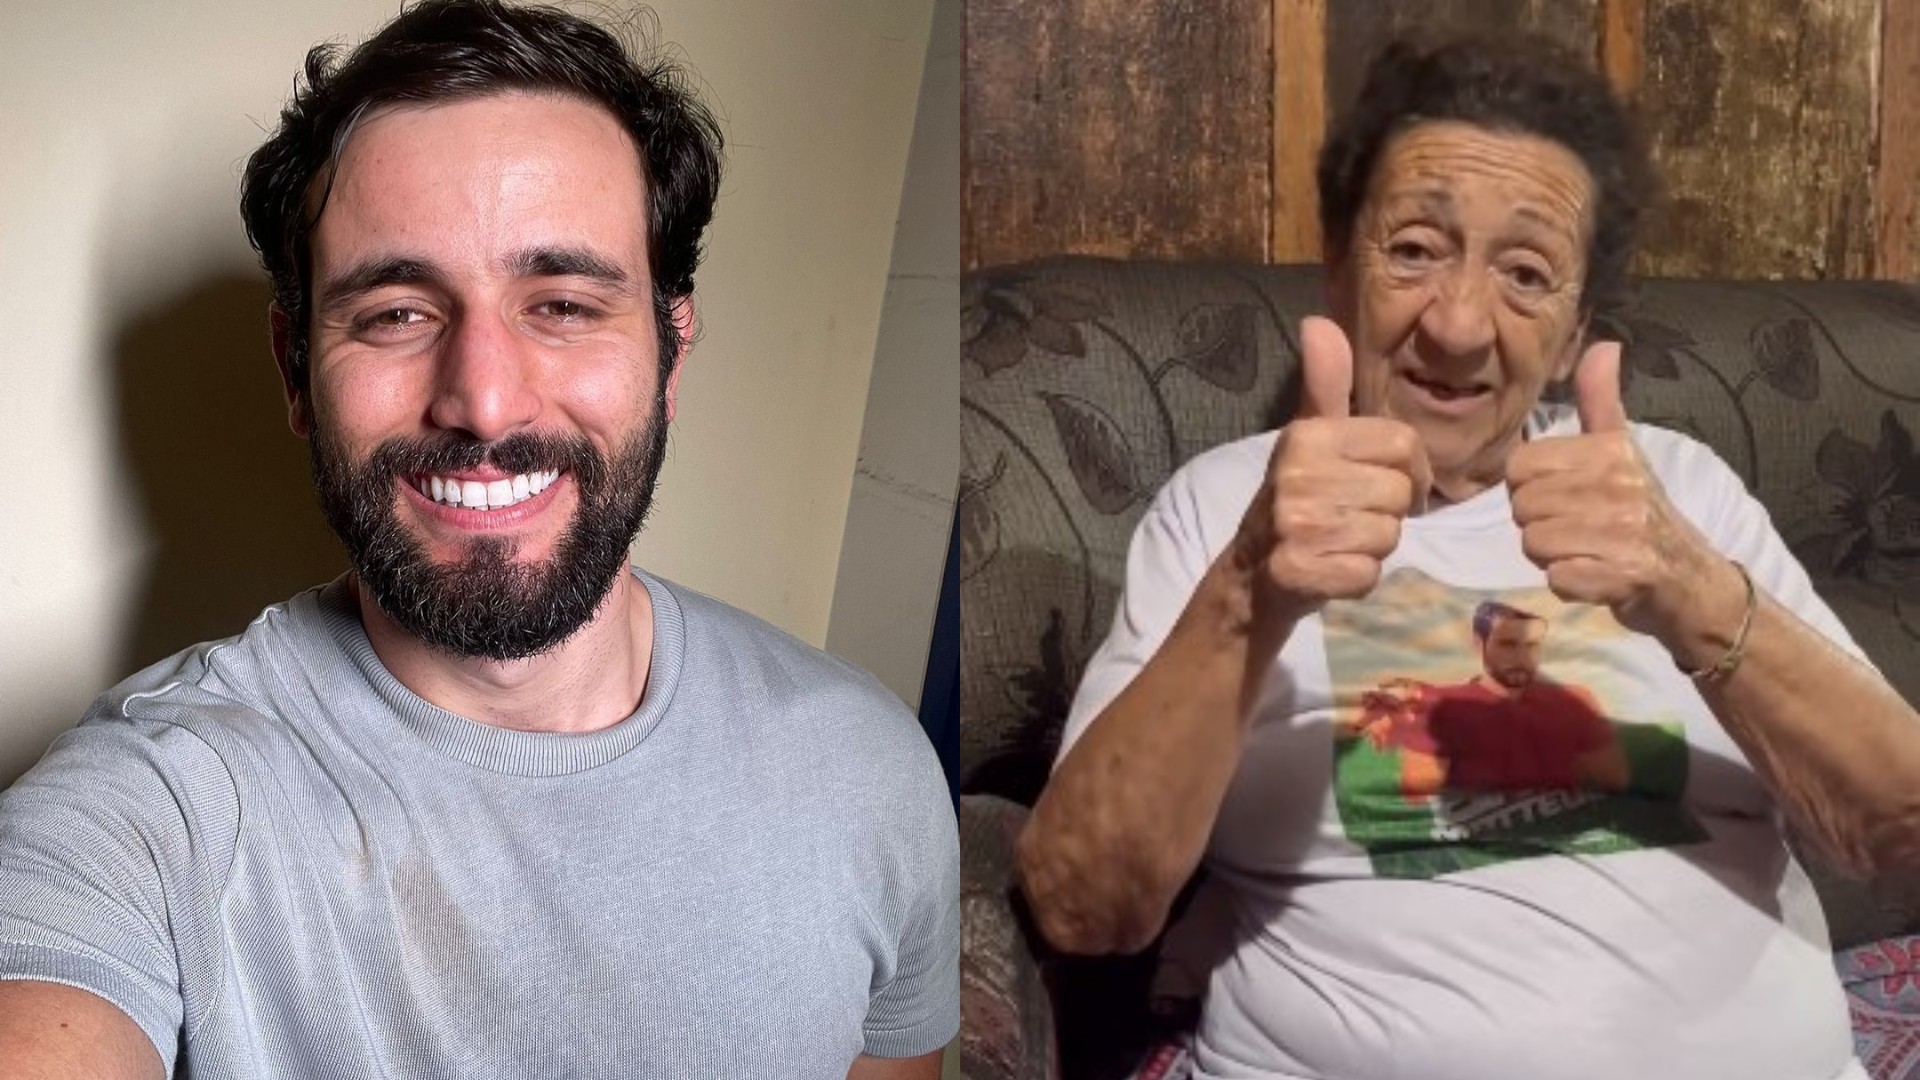 BBB24: Mateusz's grandmother will get a new house in Allegretti, and his brother will receive a gift from the former director of Globo;  He watches